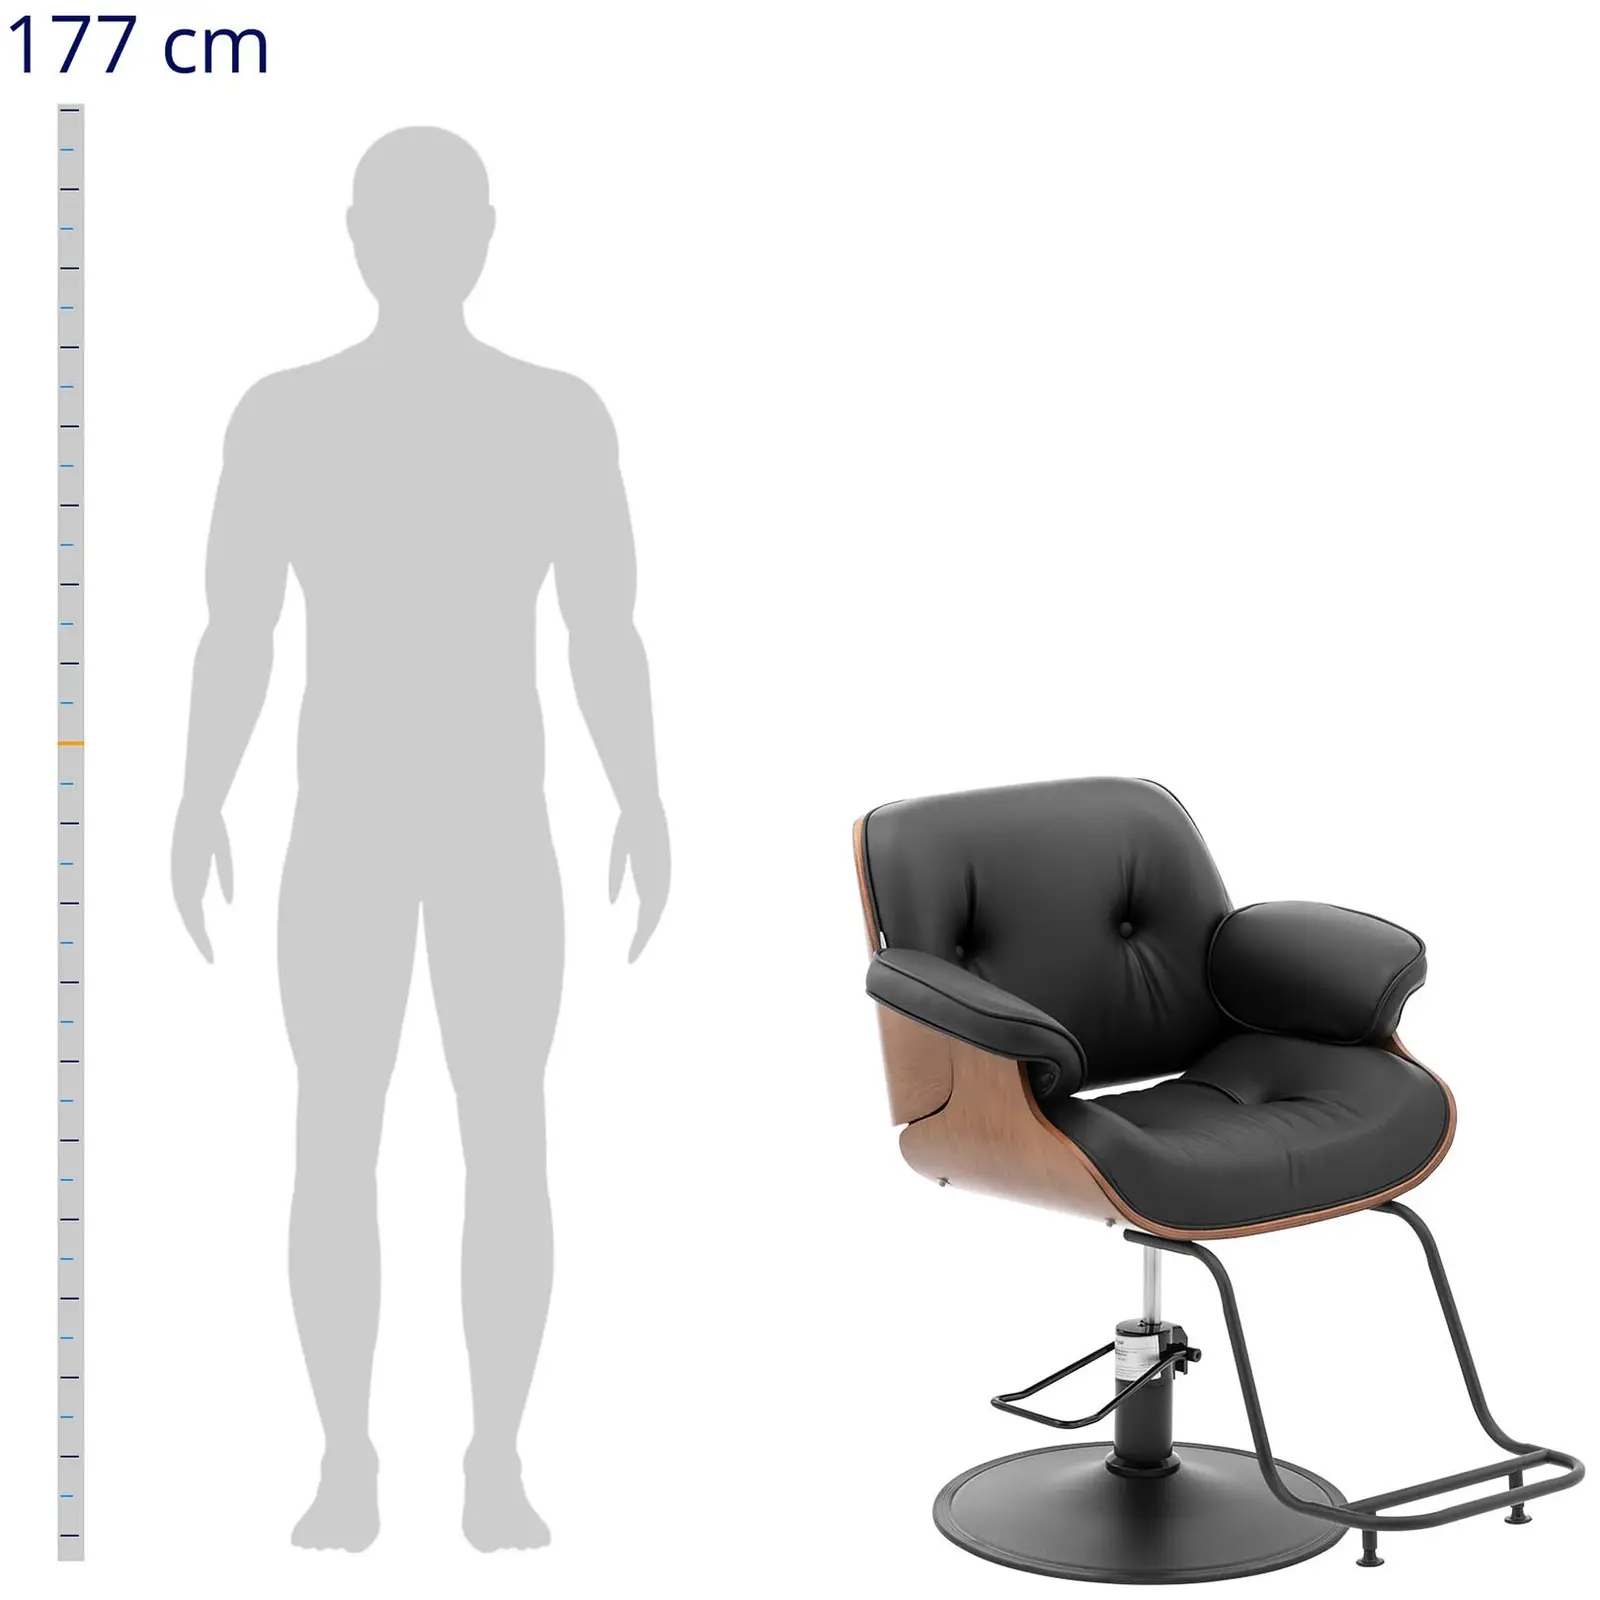 Salon Chair with Footrest - 830 - 960 mm - 200 kg - Filey Black